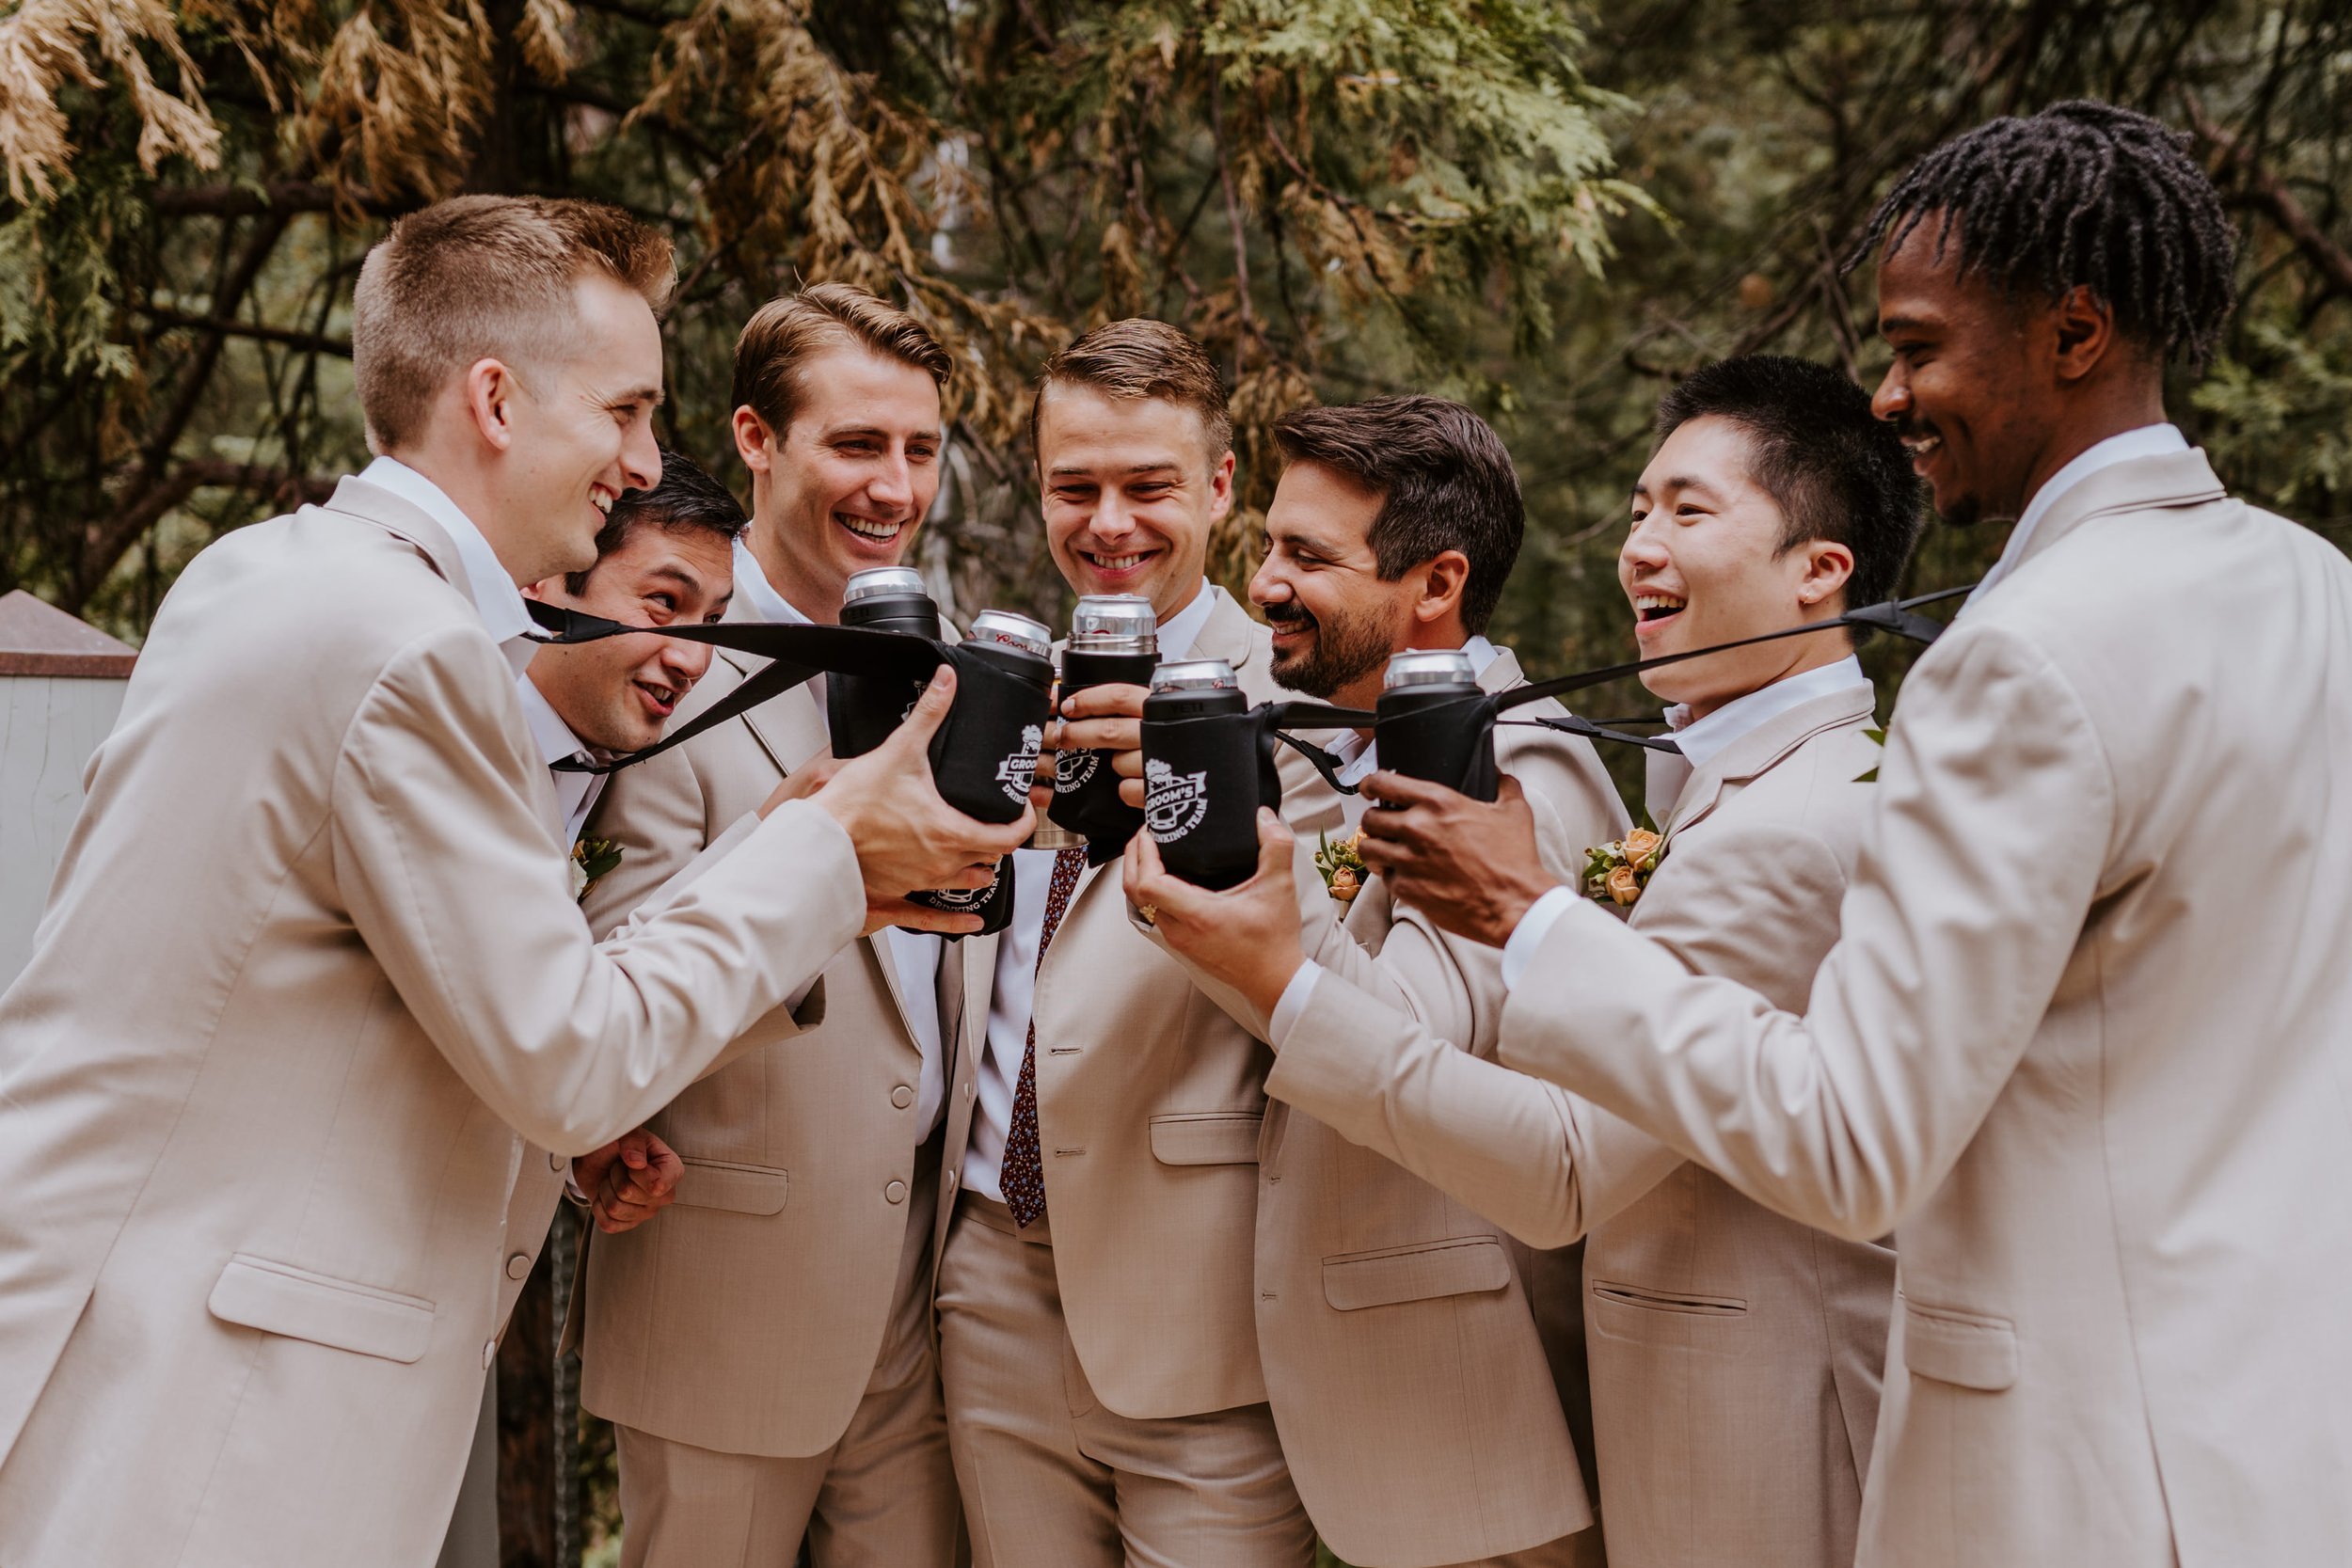 Fun groomsmen beer cozie ties getting ready at Castle in the Forest Wedding in Lake Arrowhead, Photo by Tida Svy